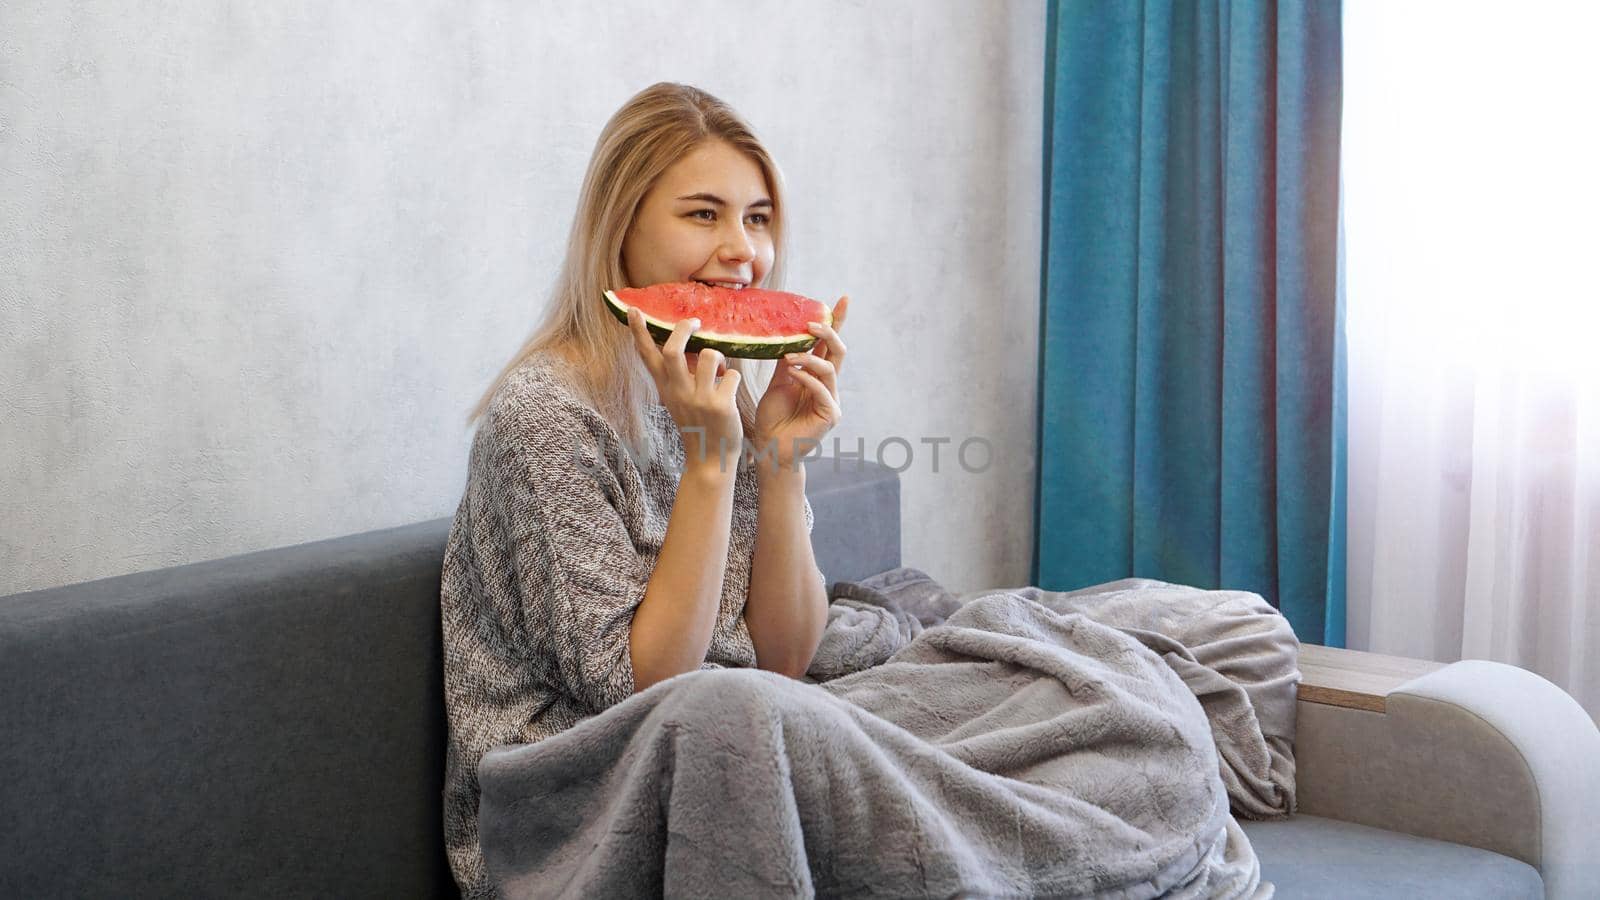 Young attractive woman eating watermelon. Woman at home in a cozy interior